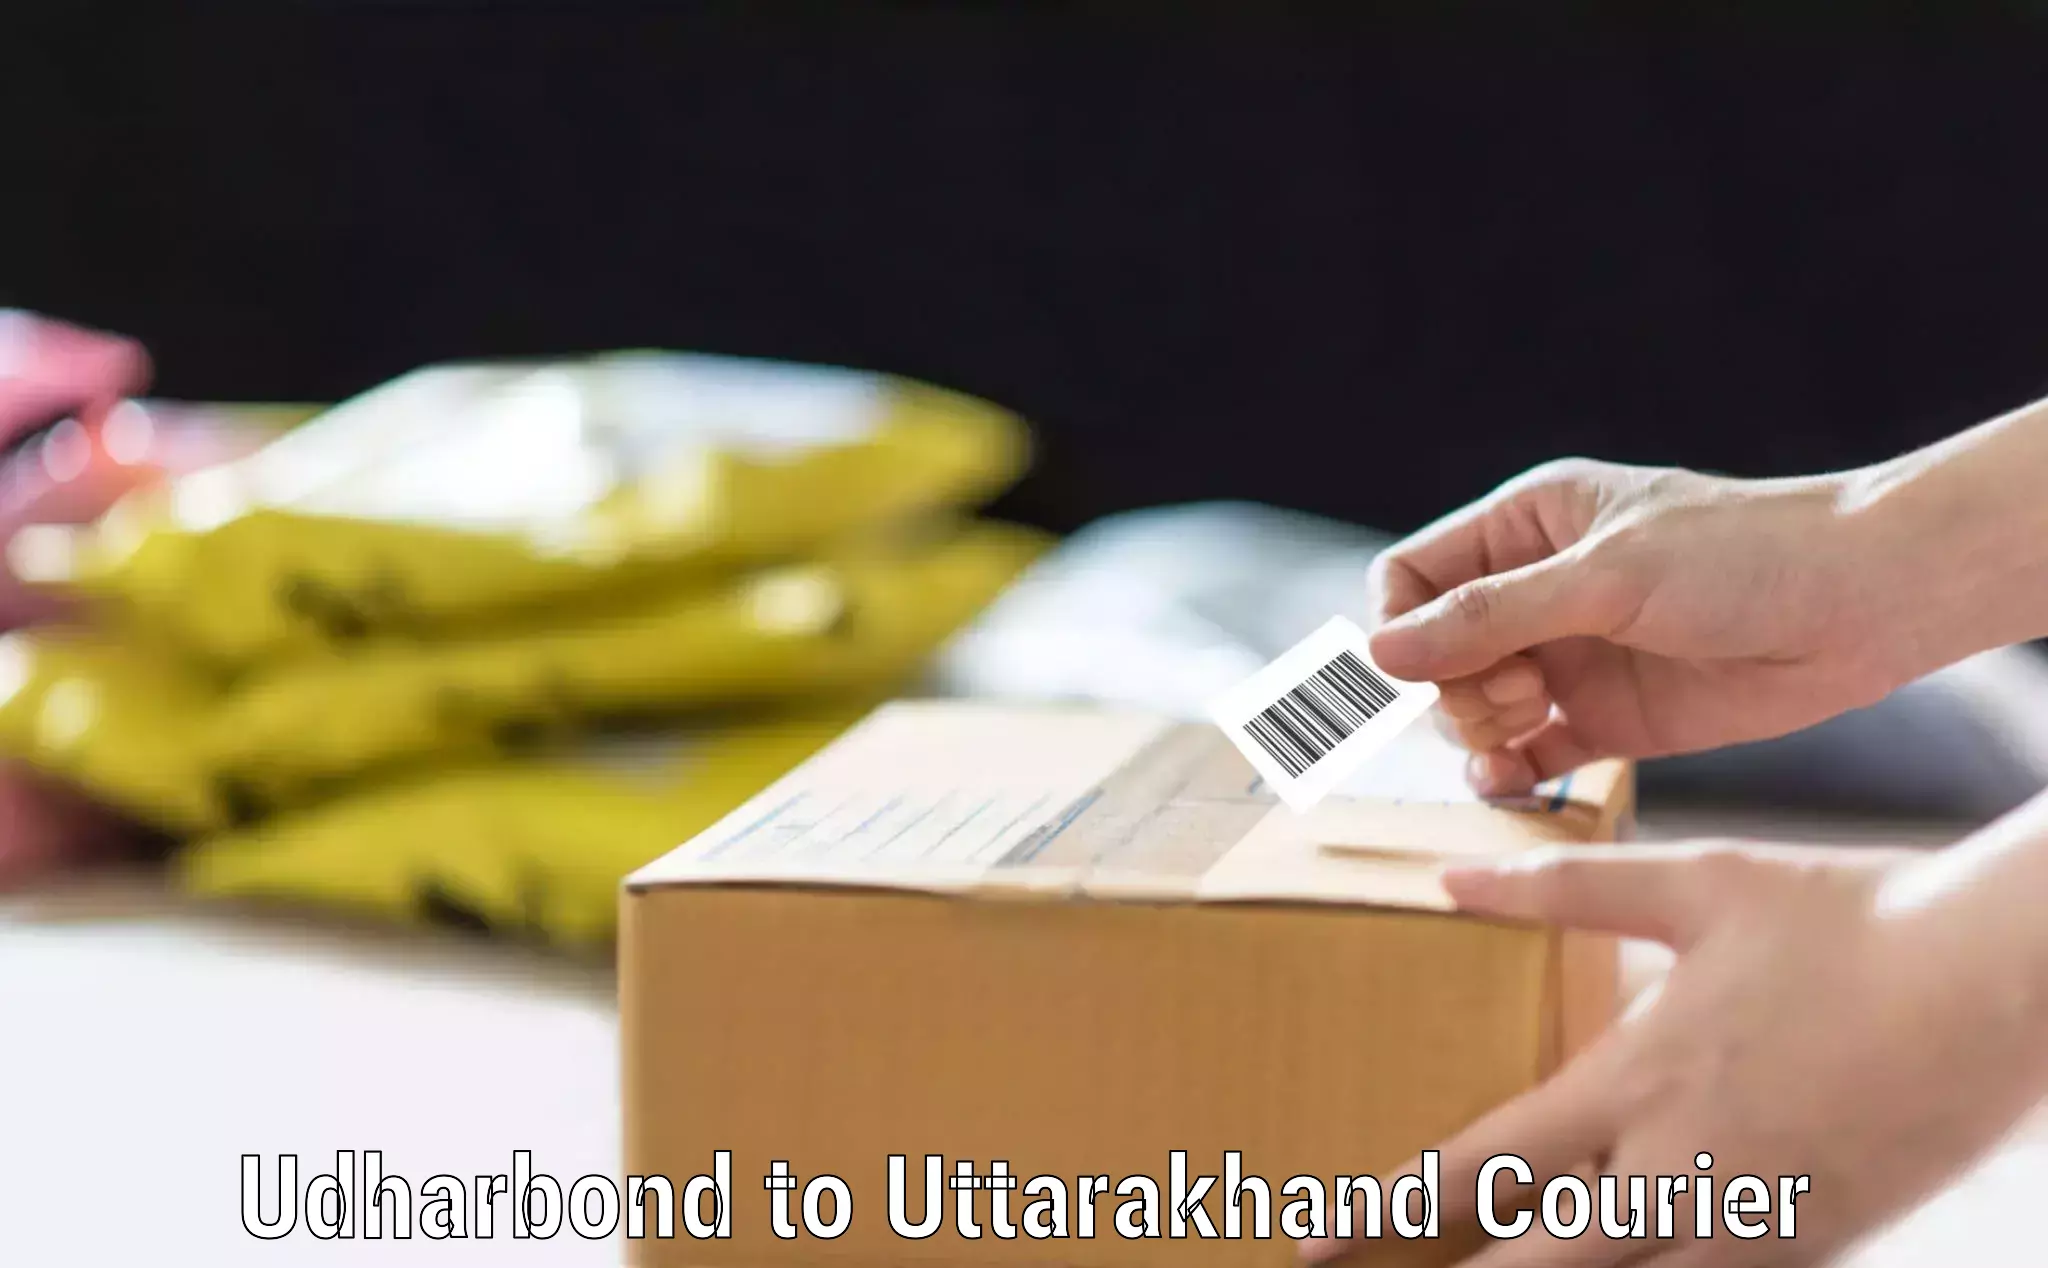 Electronic items luggage shipping in Udharbond to Joshimath